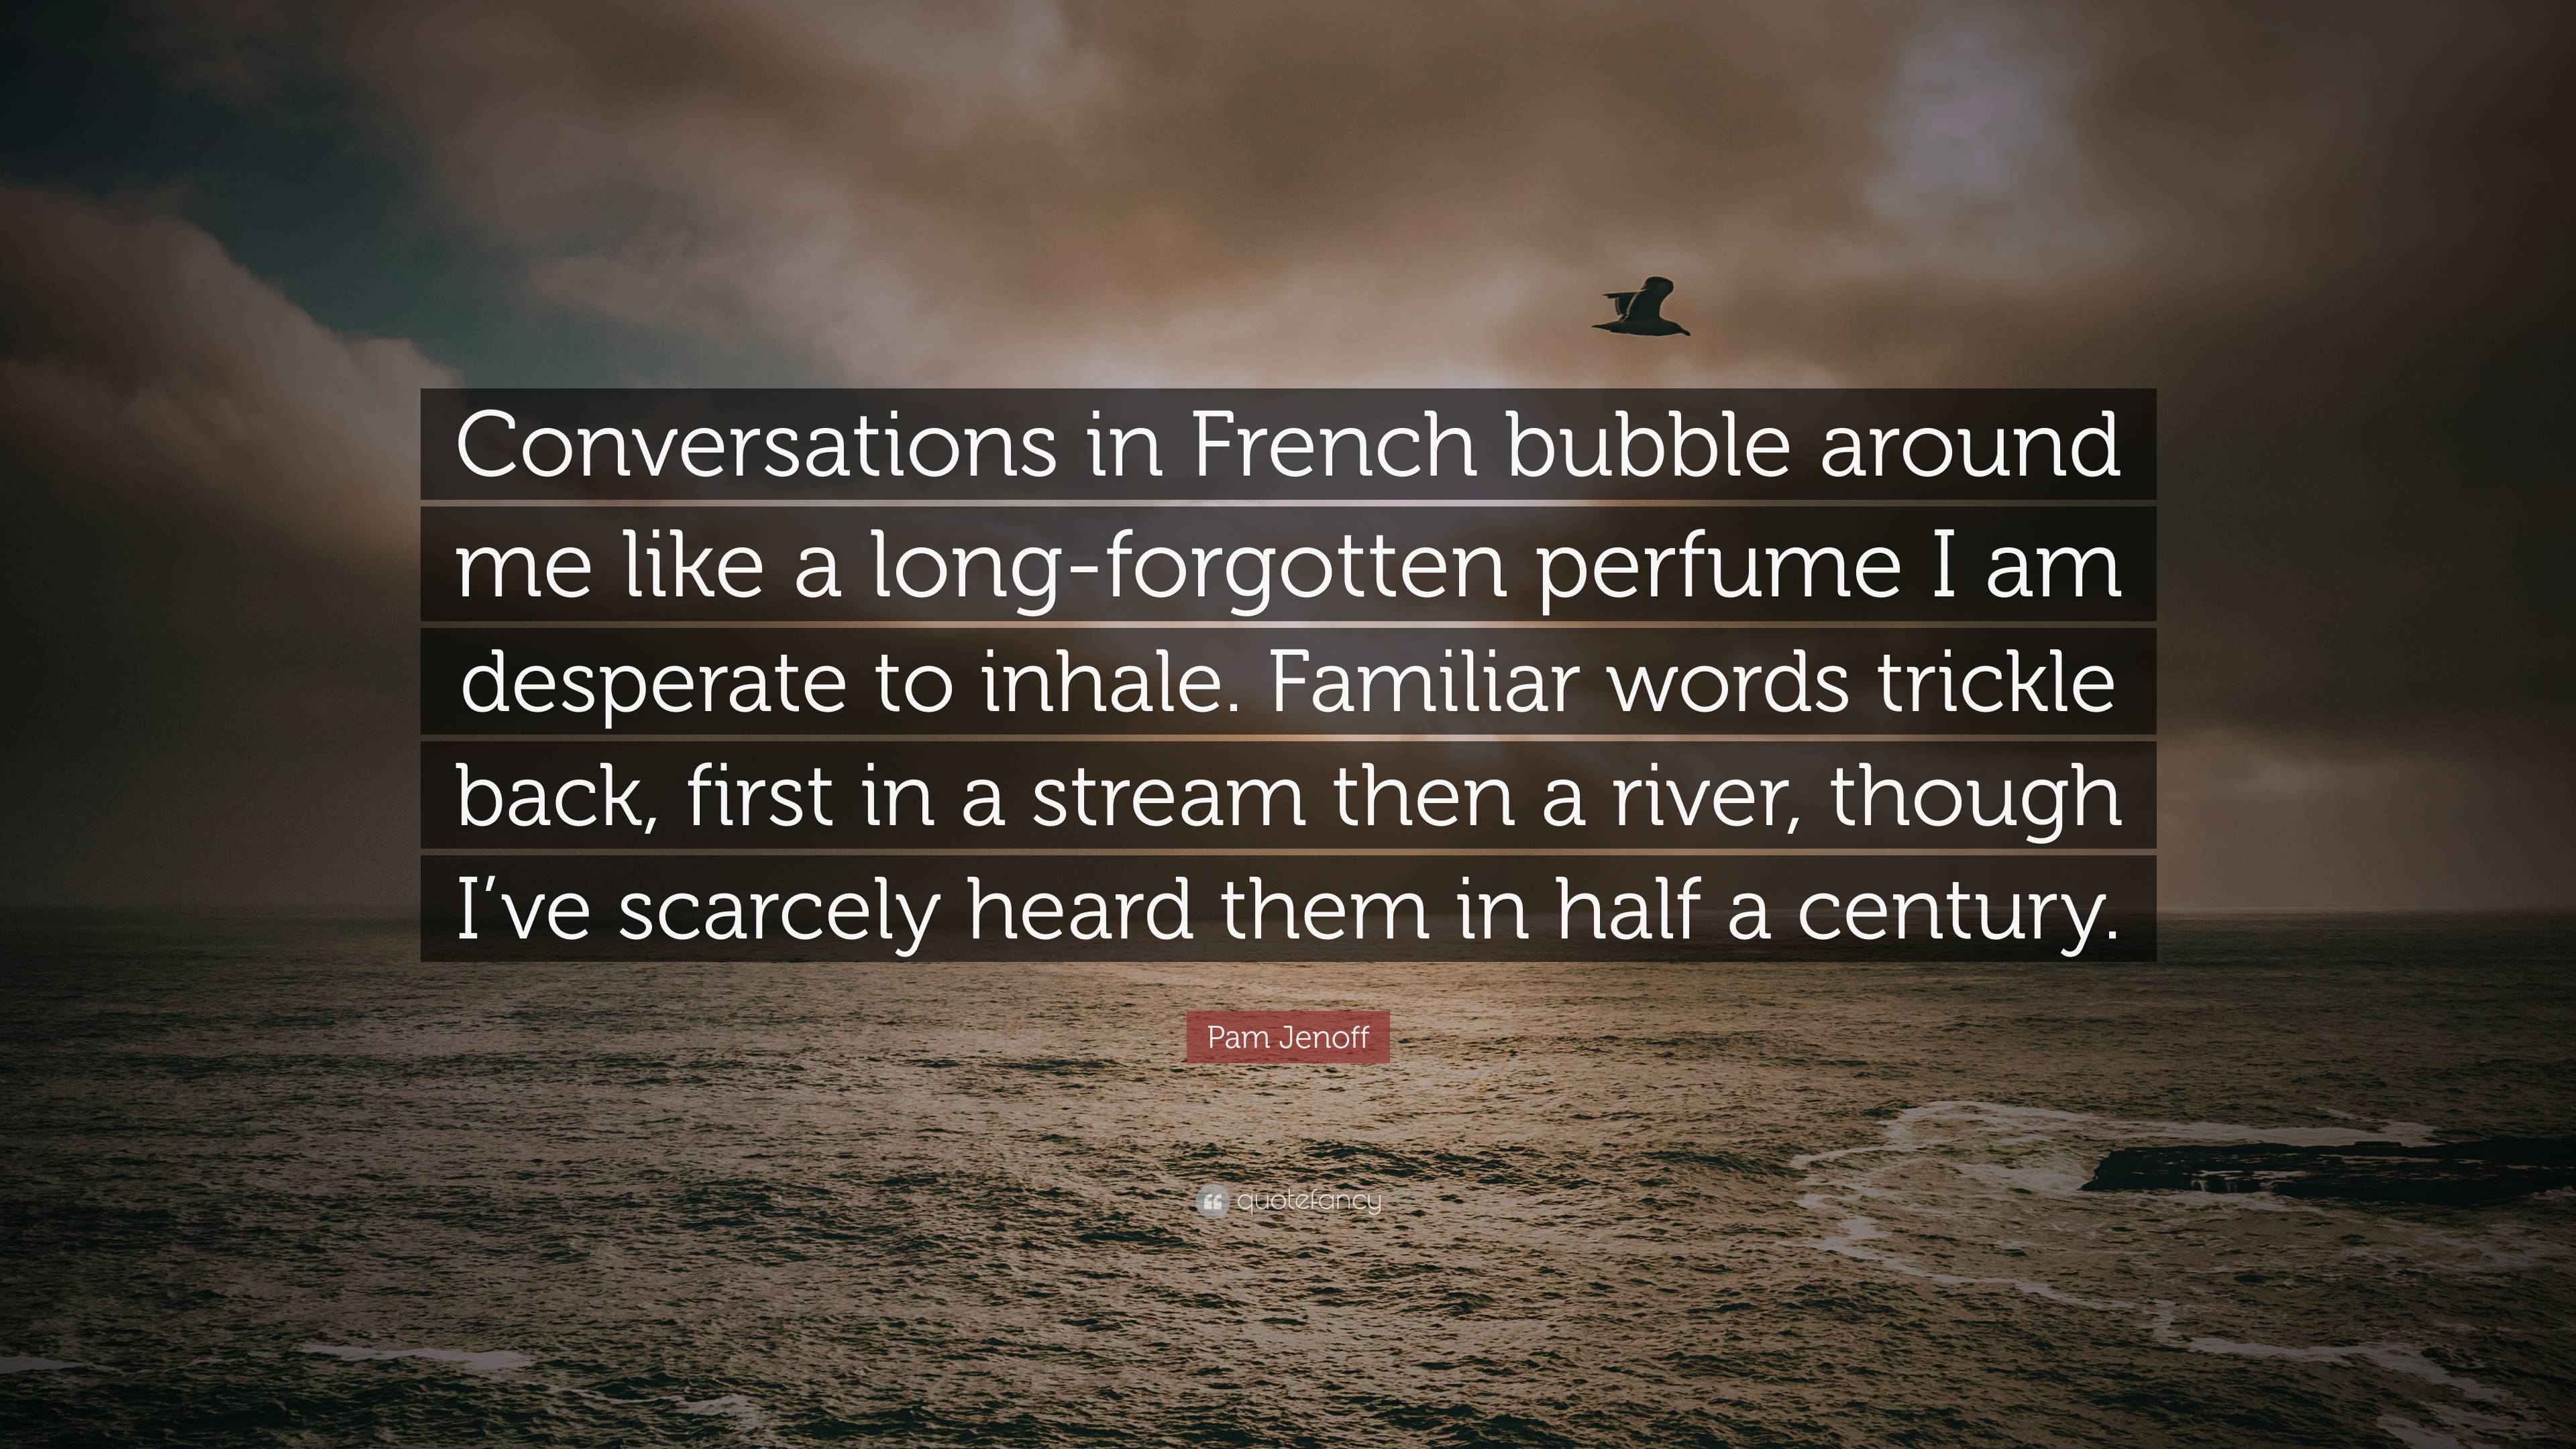 Pam Jenoff Quote: “Conversations in French bubble around me like a  long-forgotten perfume I am desperate to inhale. Familiar words trickle ...”